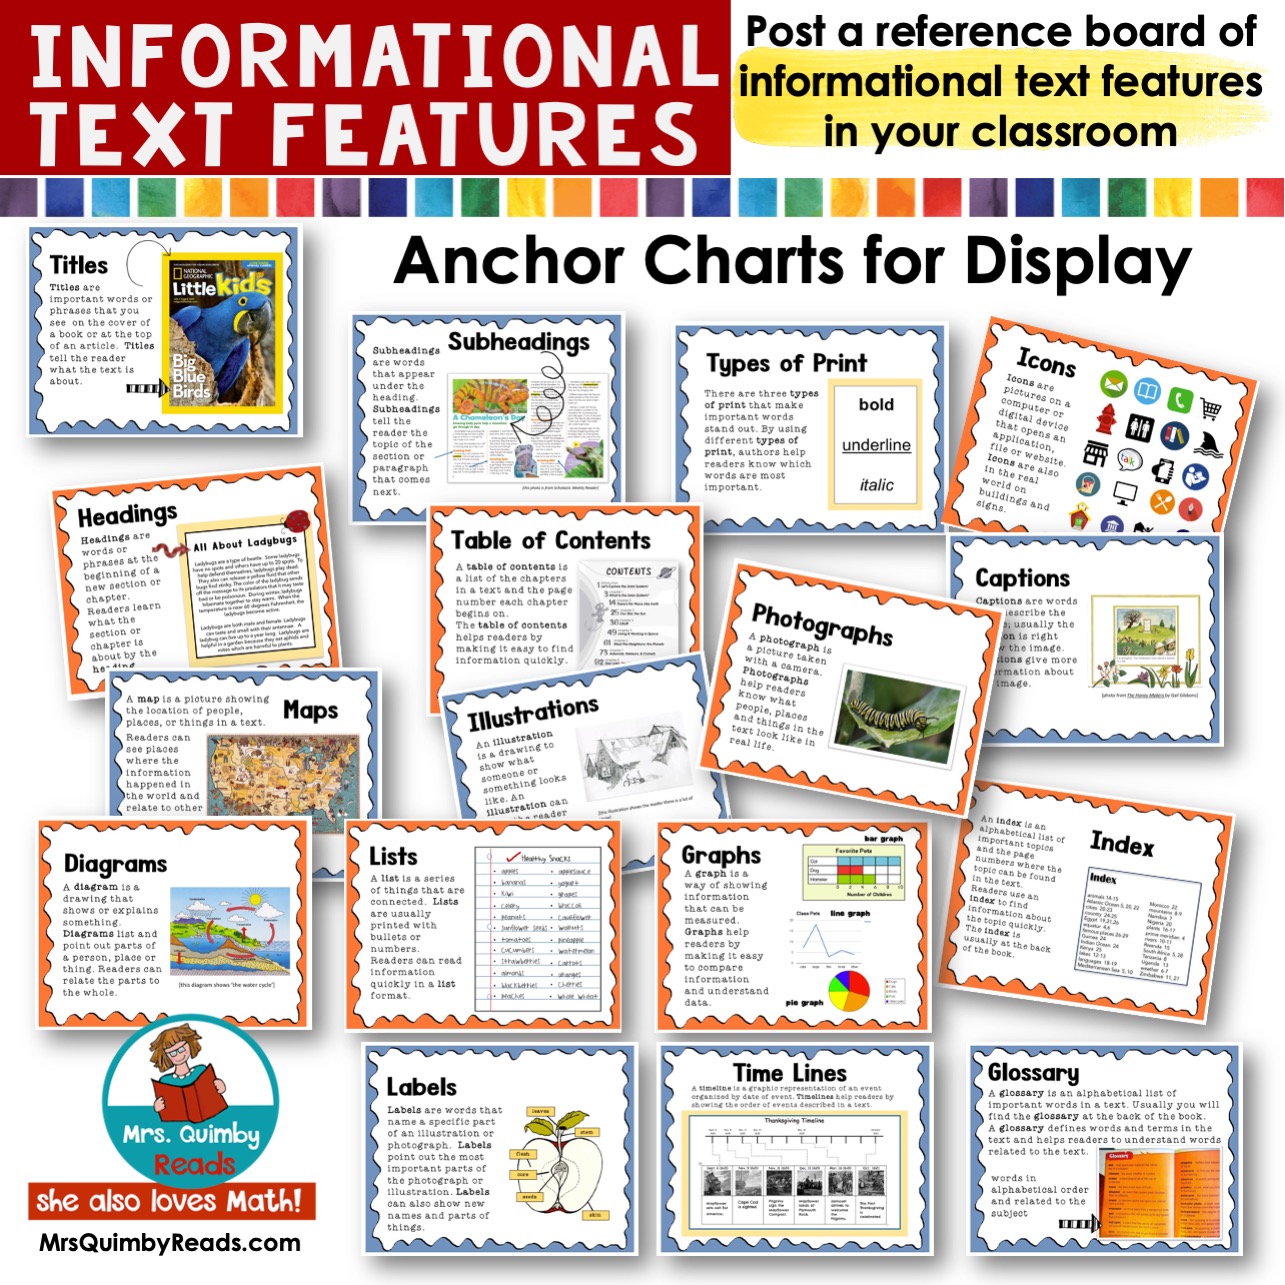 Informational Text Features | Anchor Charts | Non-Fiction | Literacy Lessons